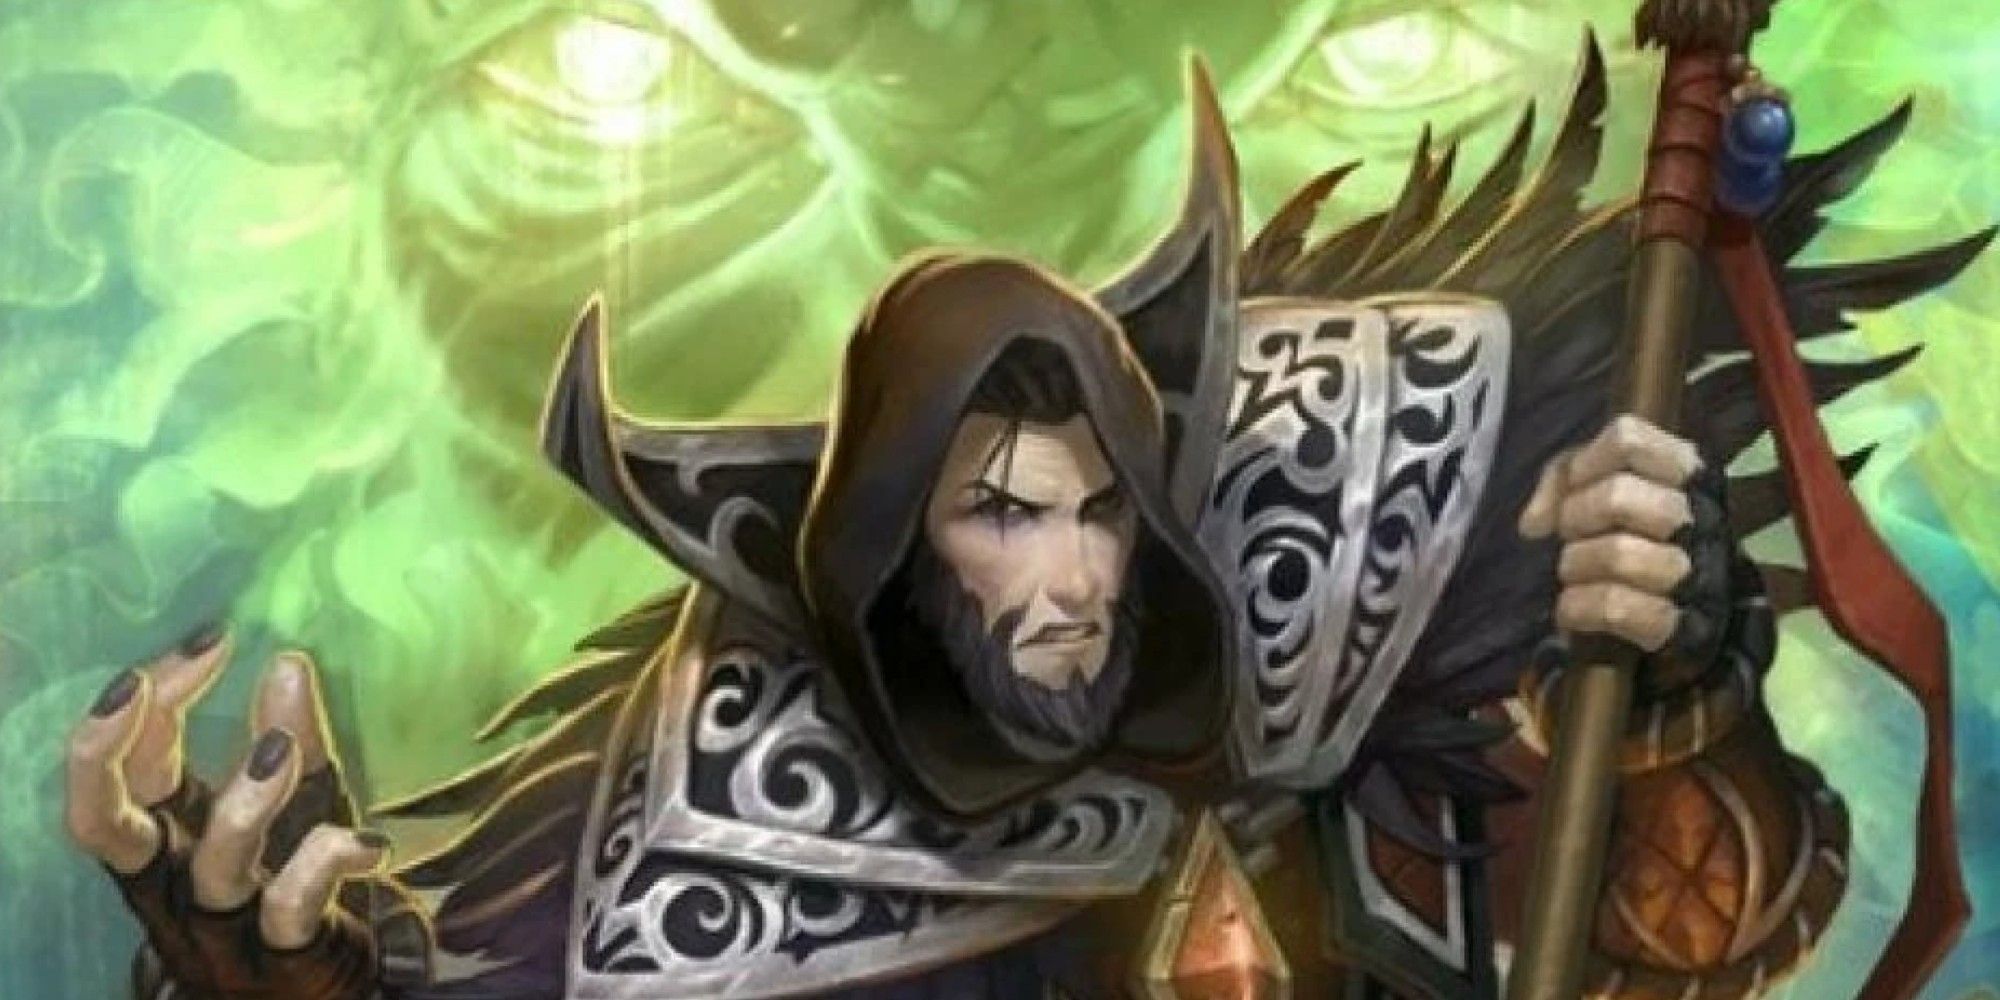 World of Warcraft Medivh with visible influence from Sargeras